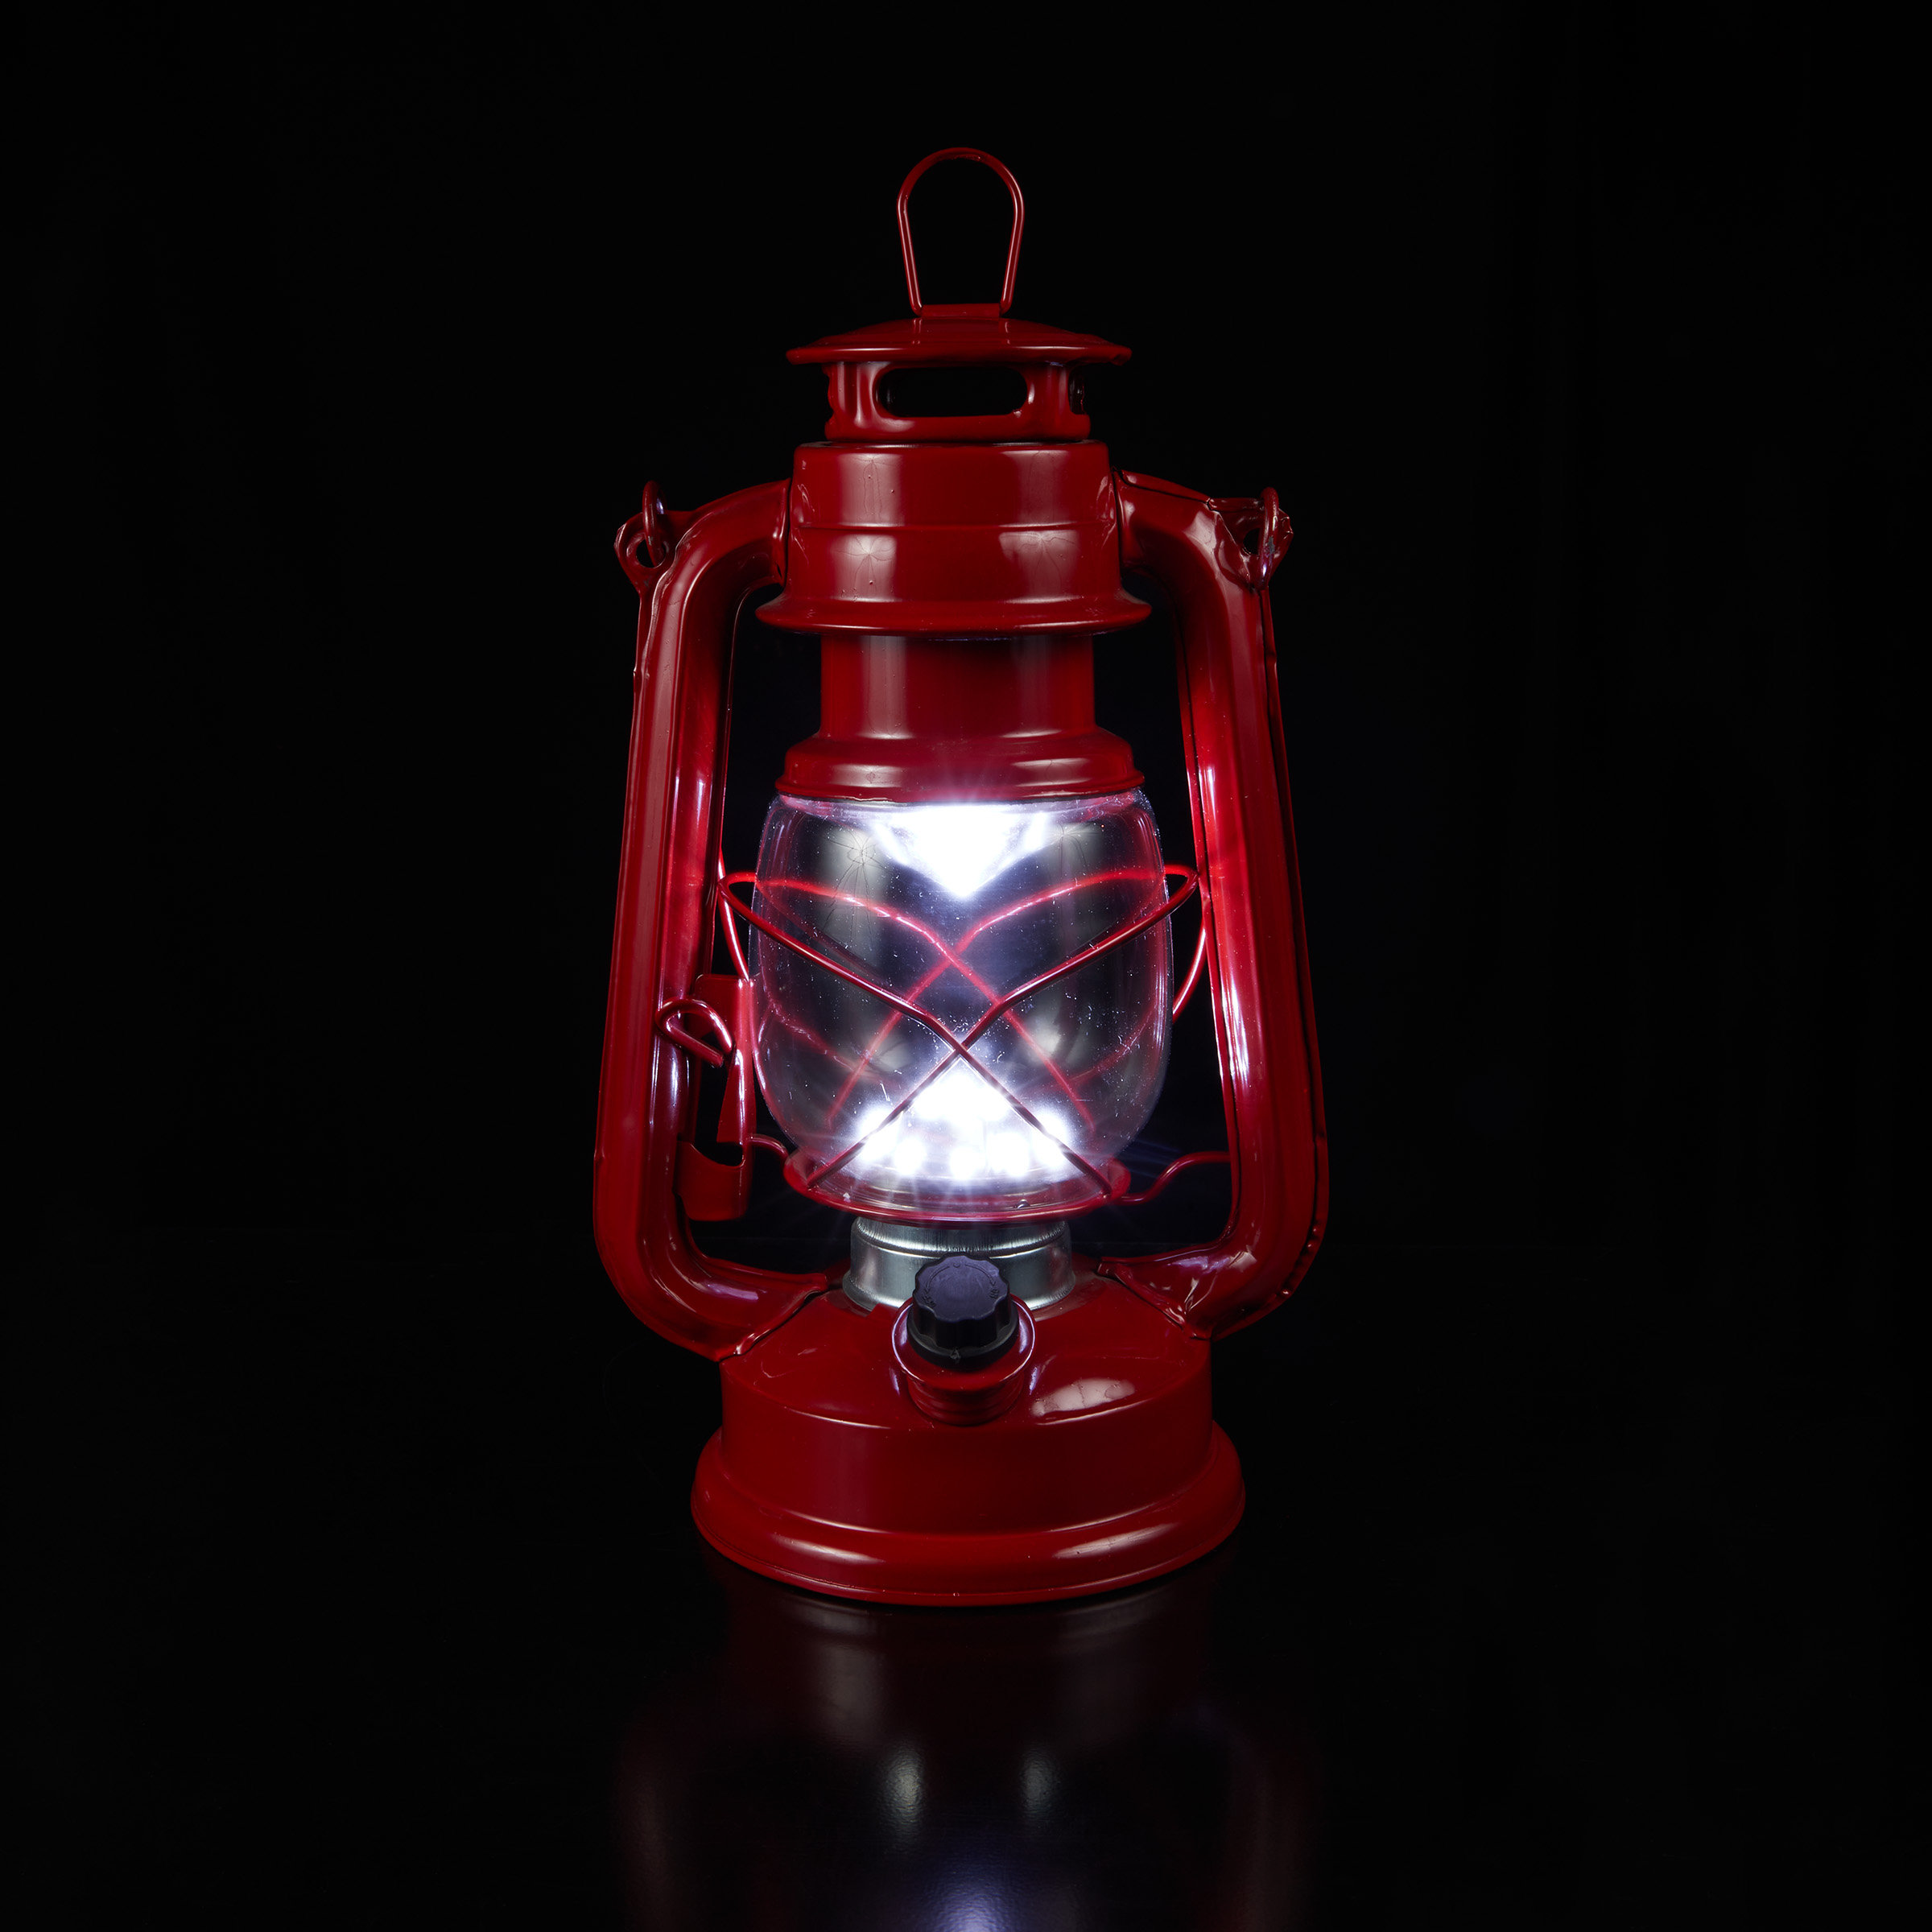 Dimmable Portable Hurricane Lantern 15 LED Light Camping Tent Carry Lamp ~ RED 